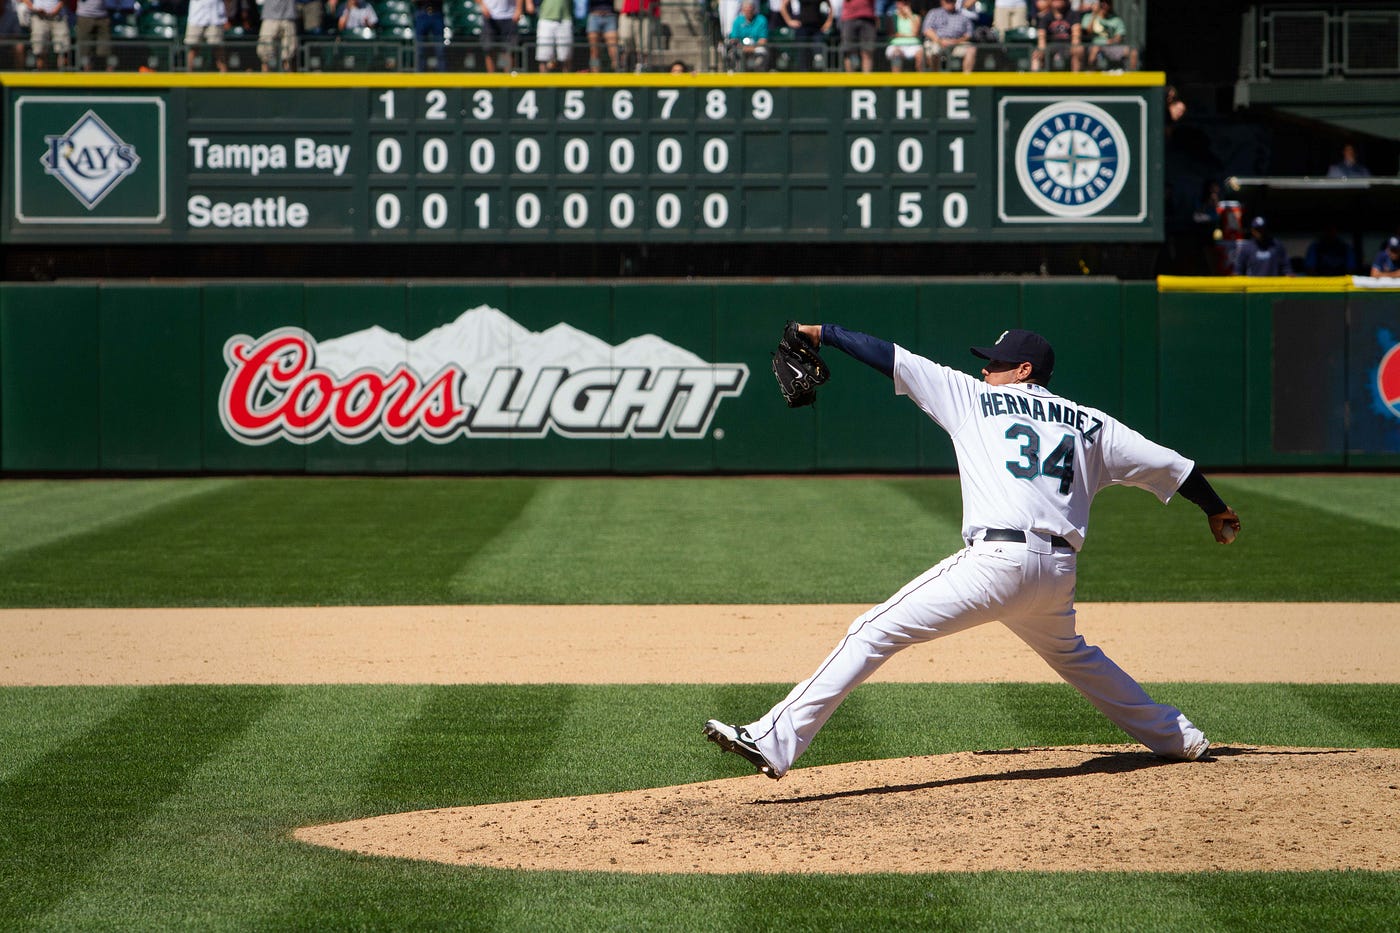 Classic Mariners Games: Félix Hernández's Perfect Game, by Mariners PR